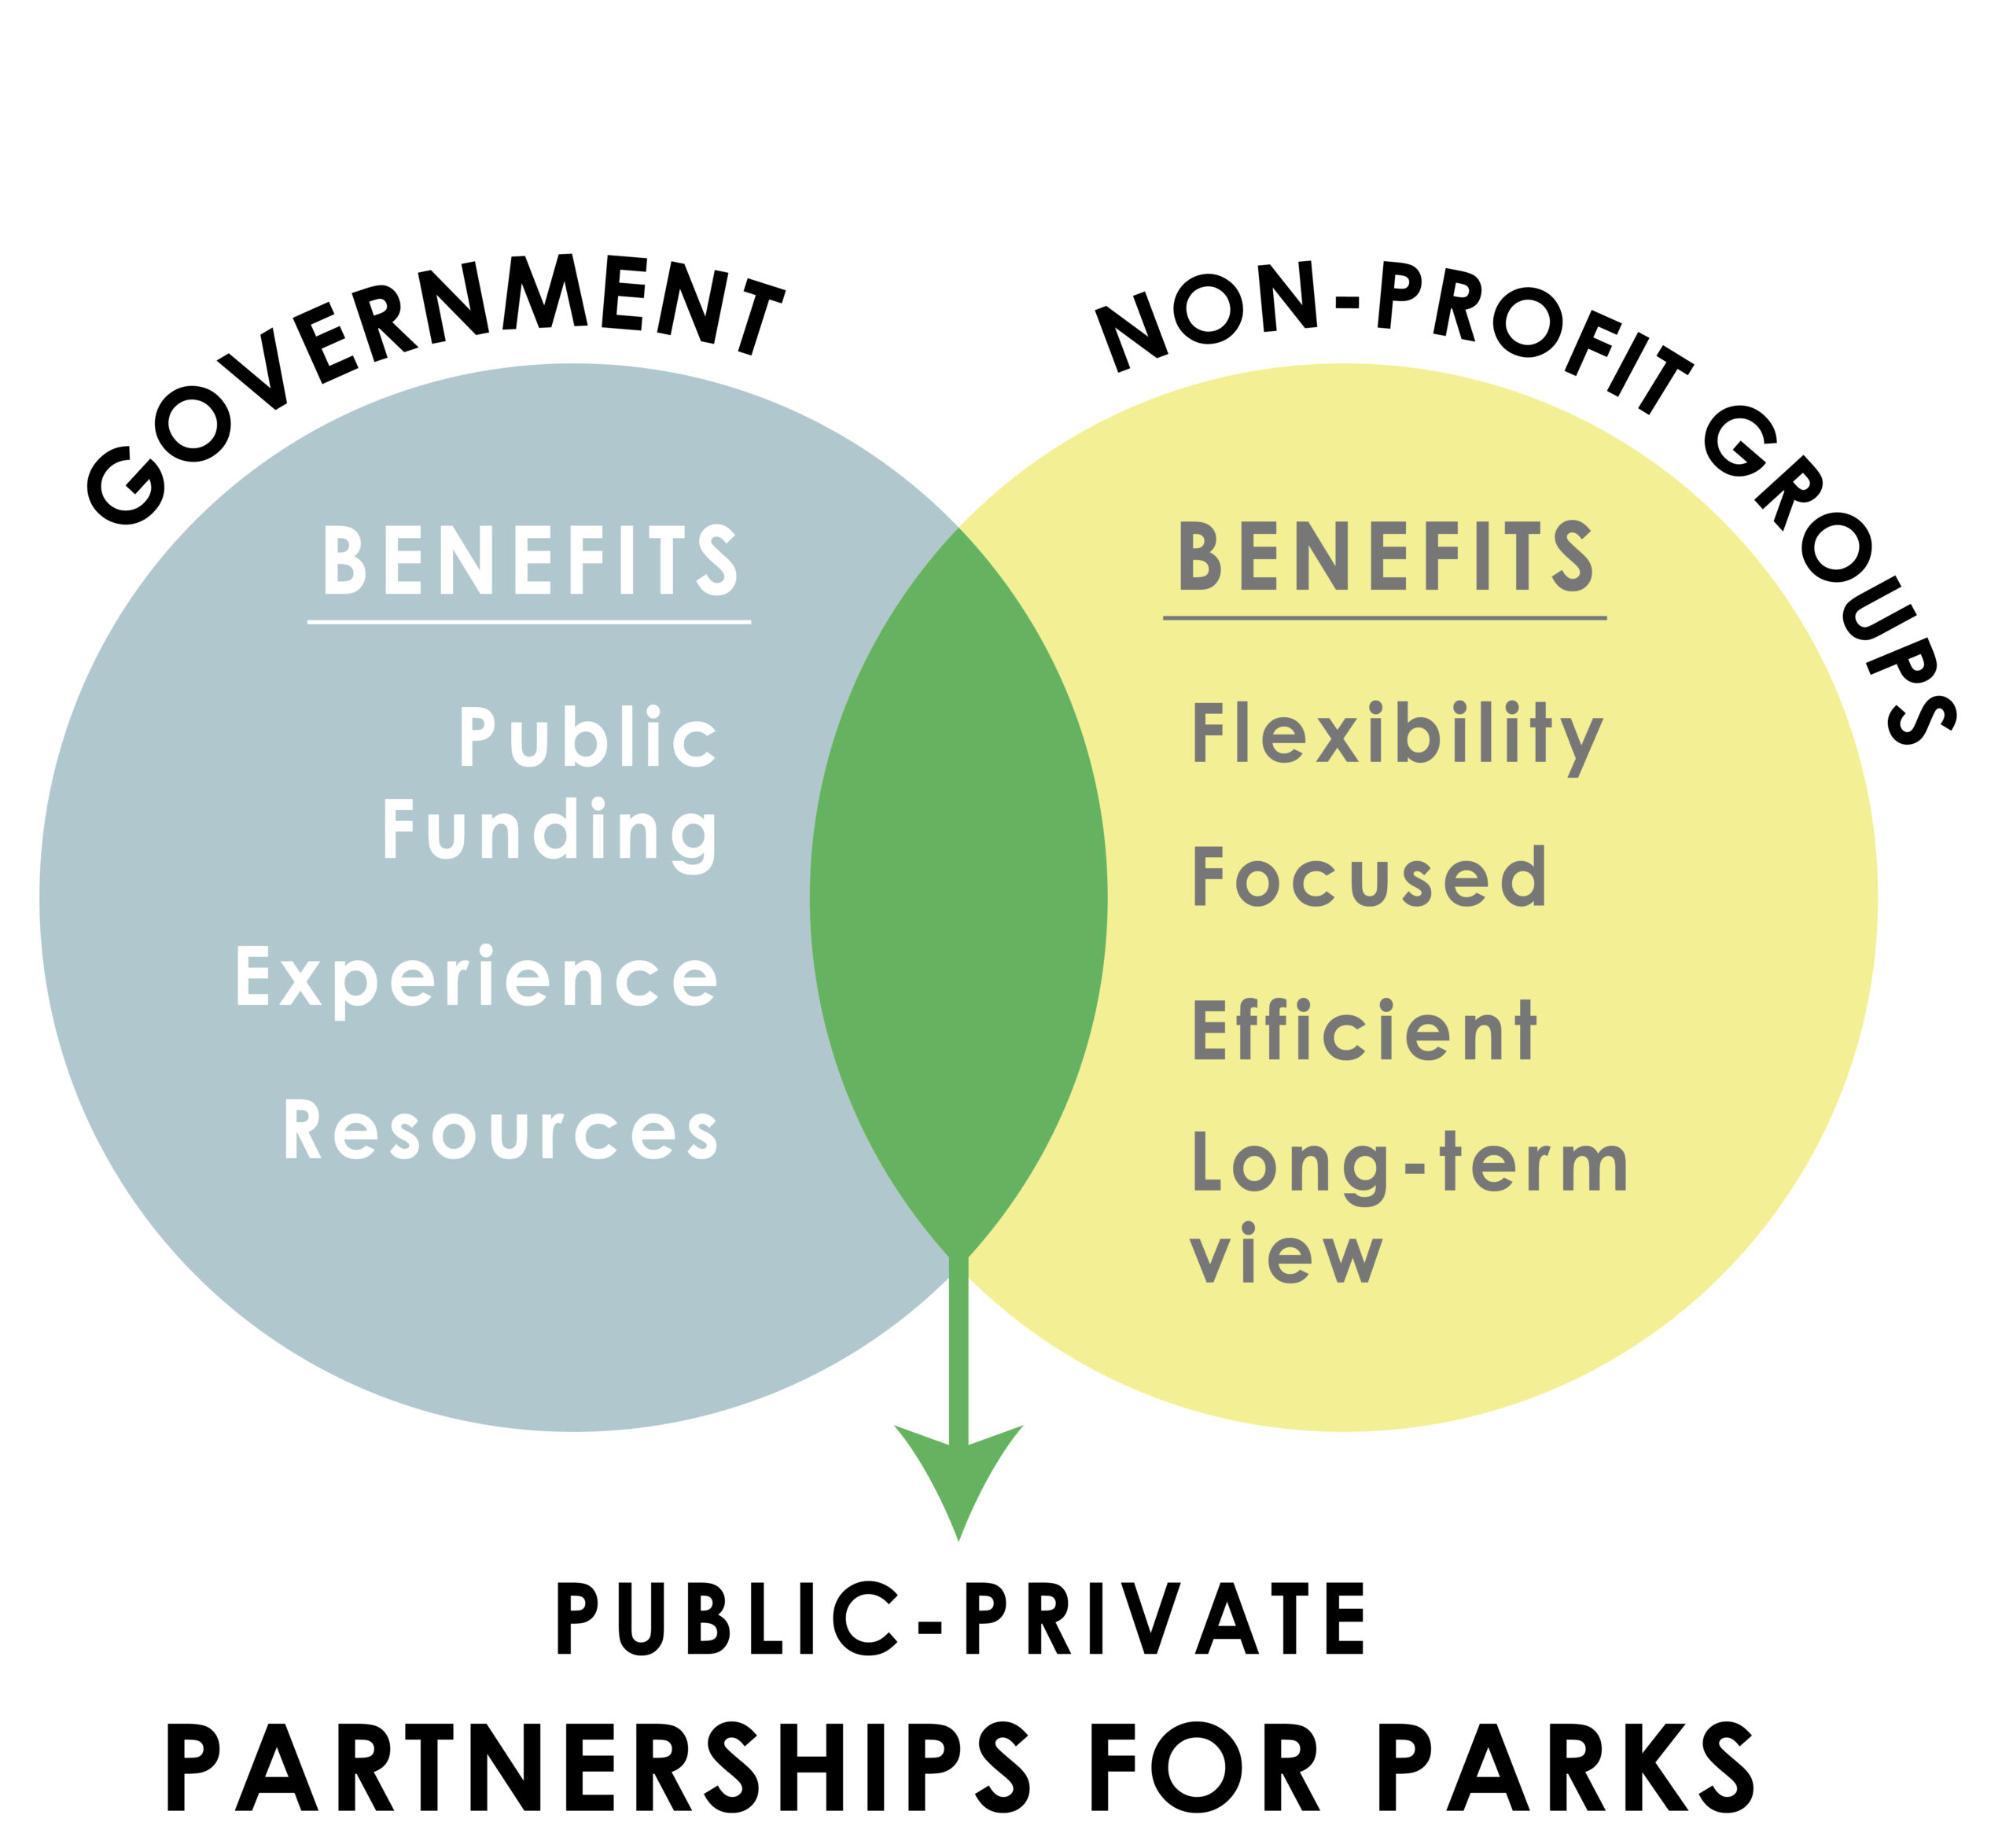 A Venn diagram showing the intersection of governments and non-profits (and the benefits they each bring) to create partnerships for parks.